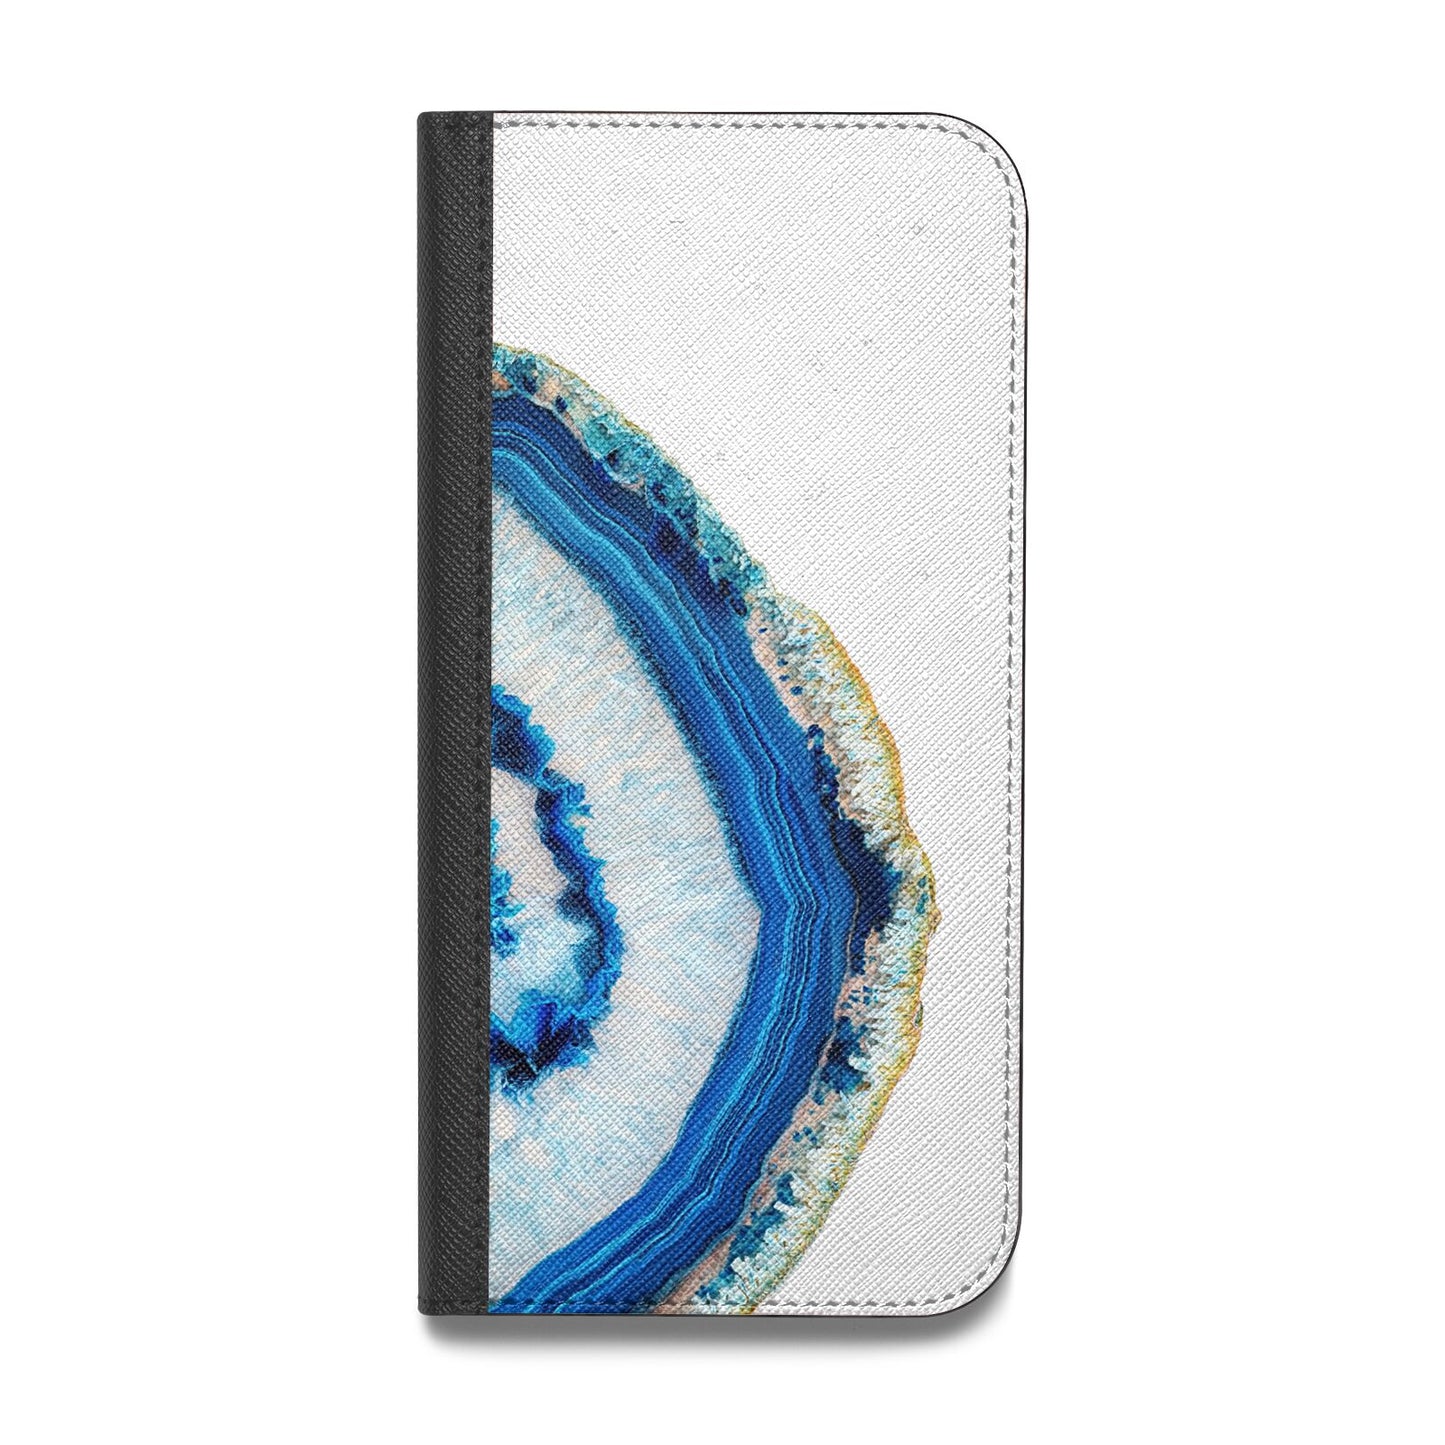 Agate Dark Blue and Turquoise Vegan Leather Flip iPhone Case